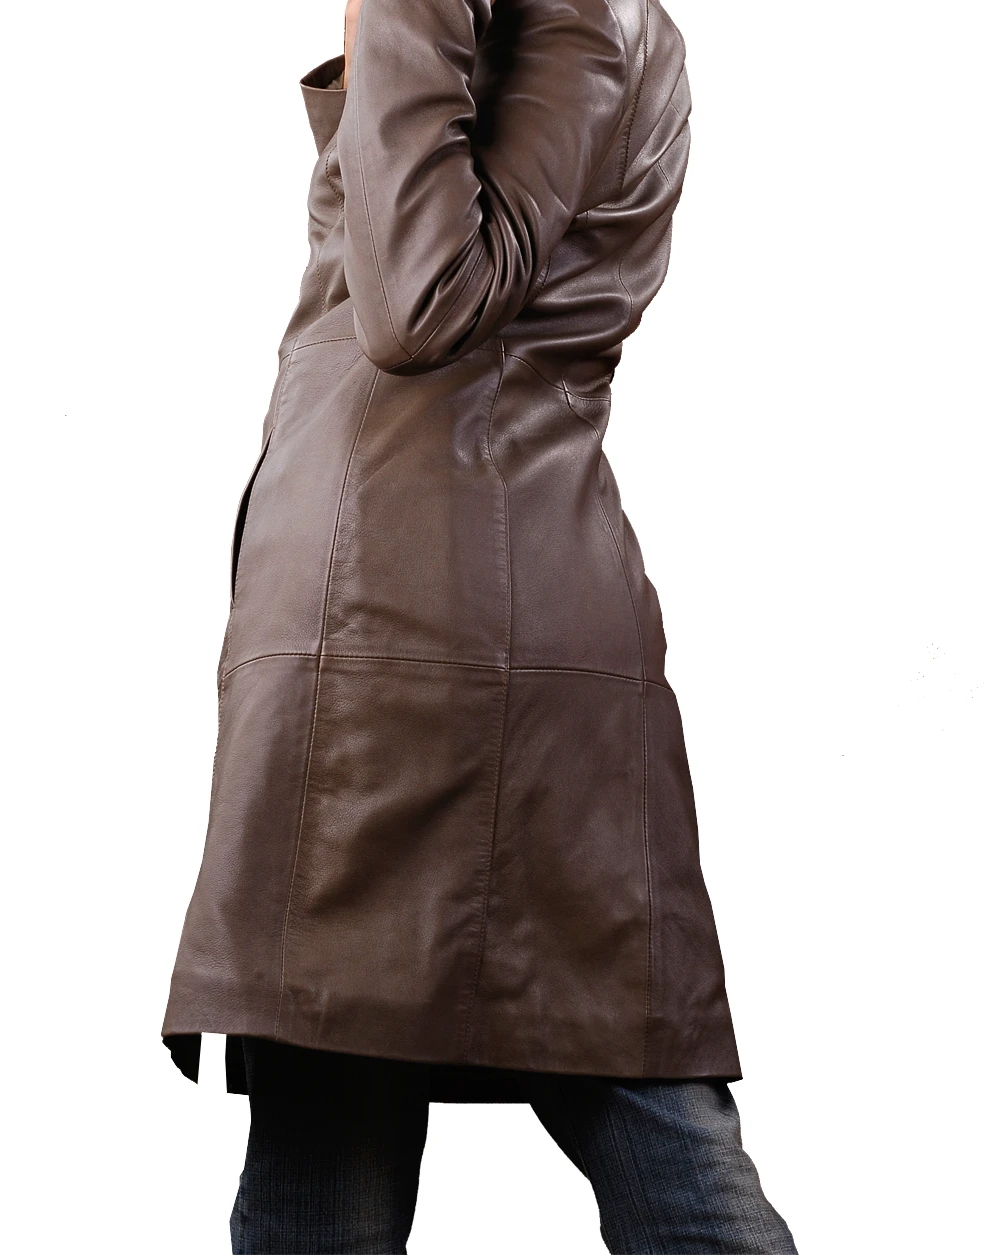 Womens long leather jacket